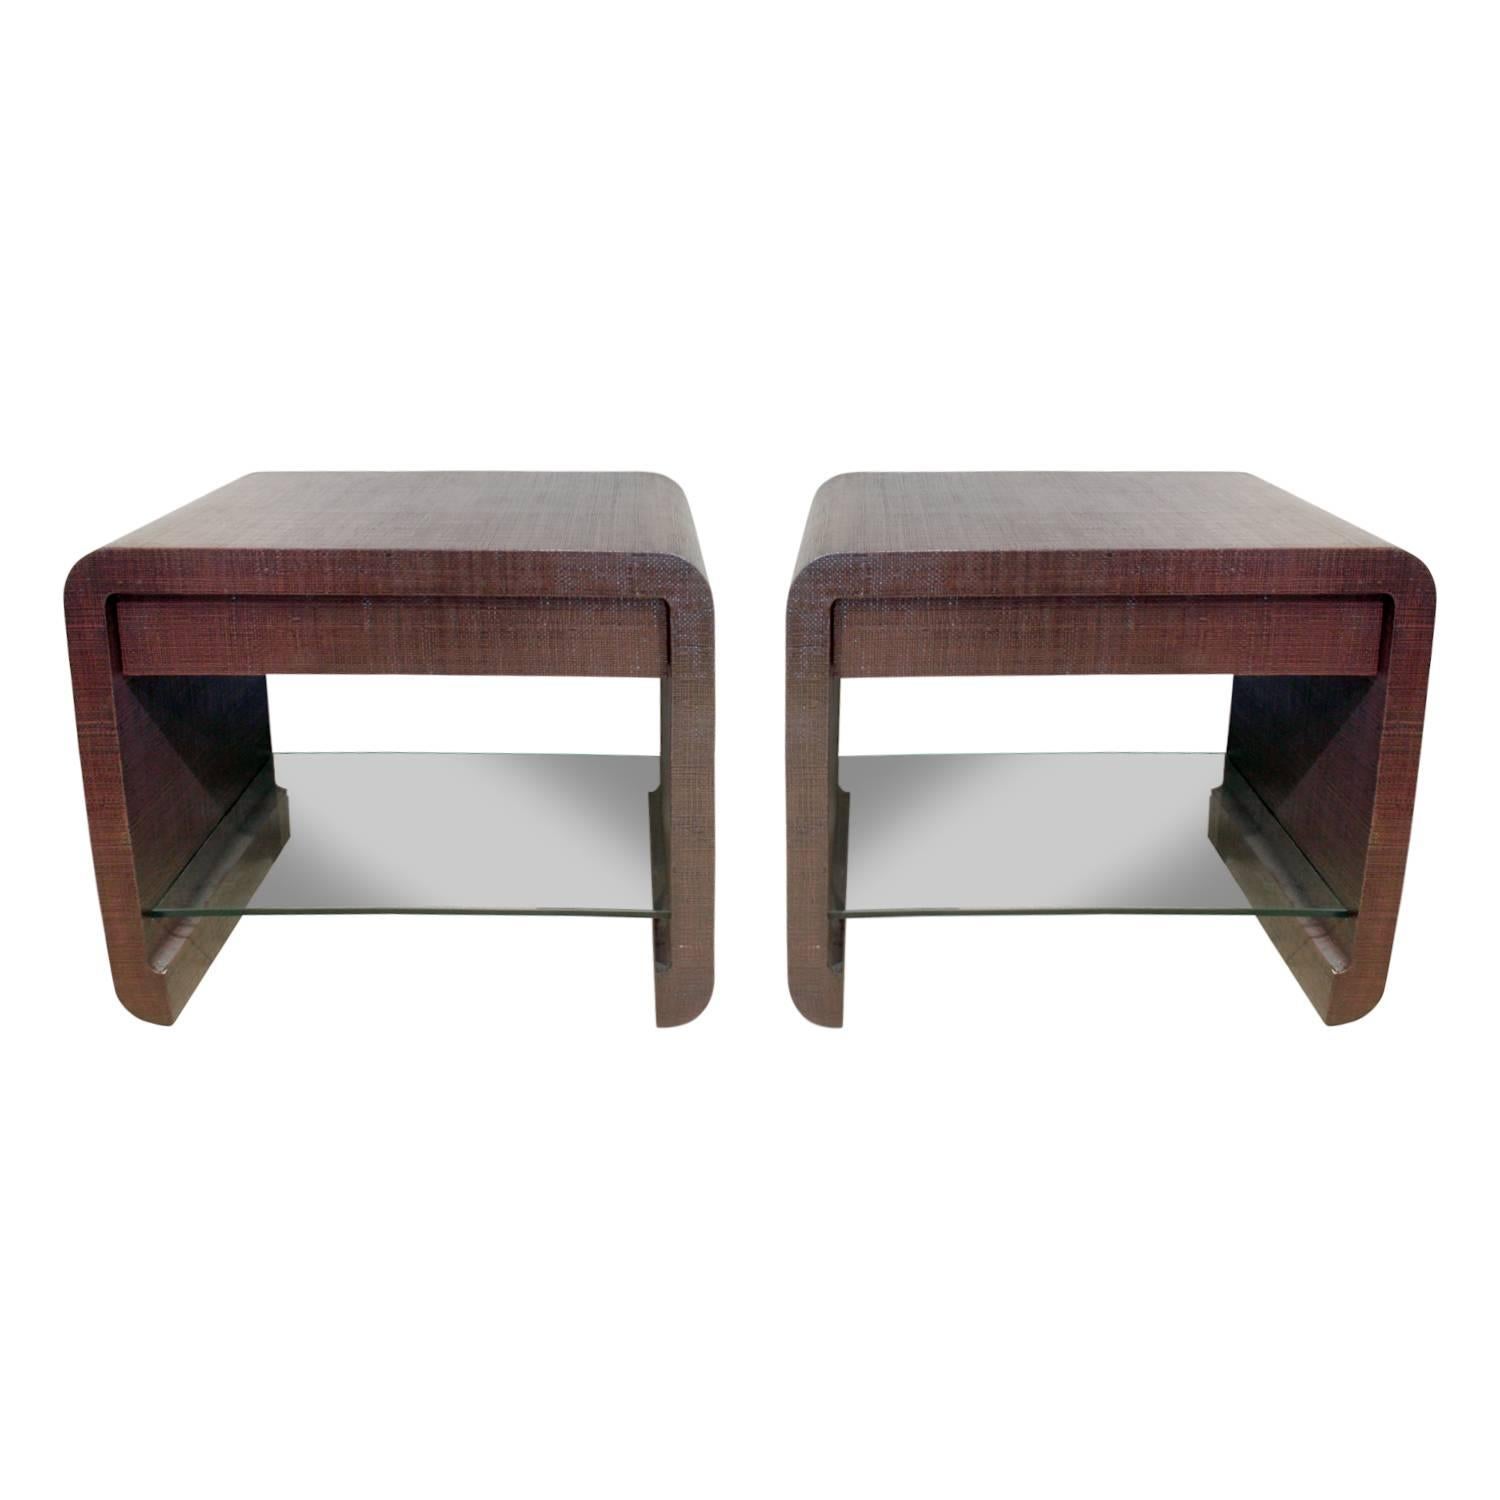 Ron Seff Pair of Bedside Tables in Ox Blood Lacquered Linen, 1980s